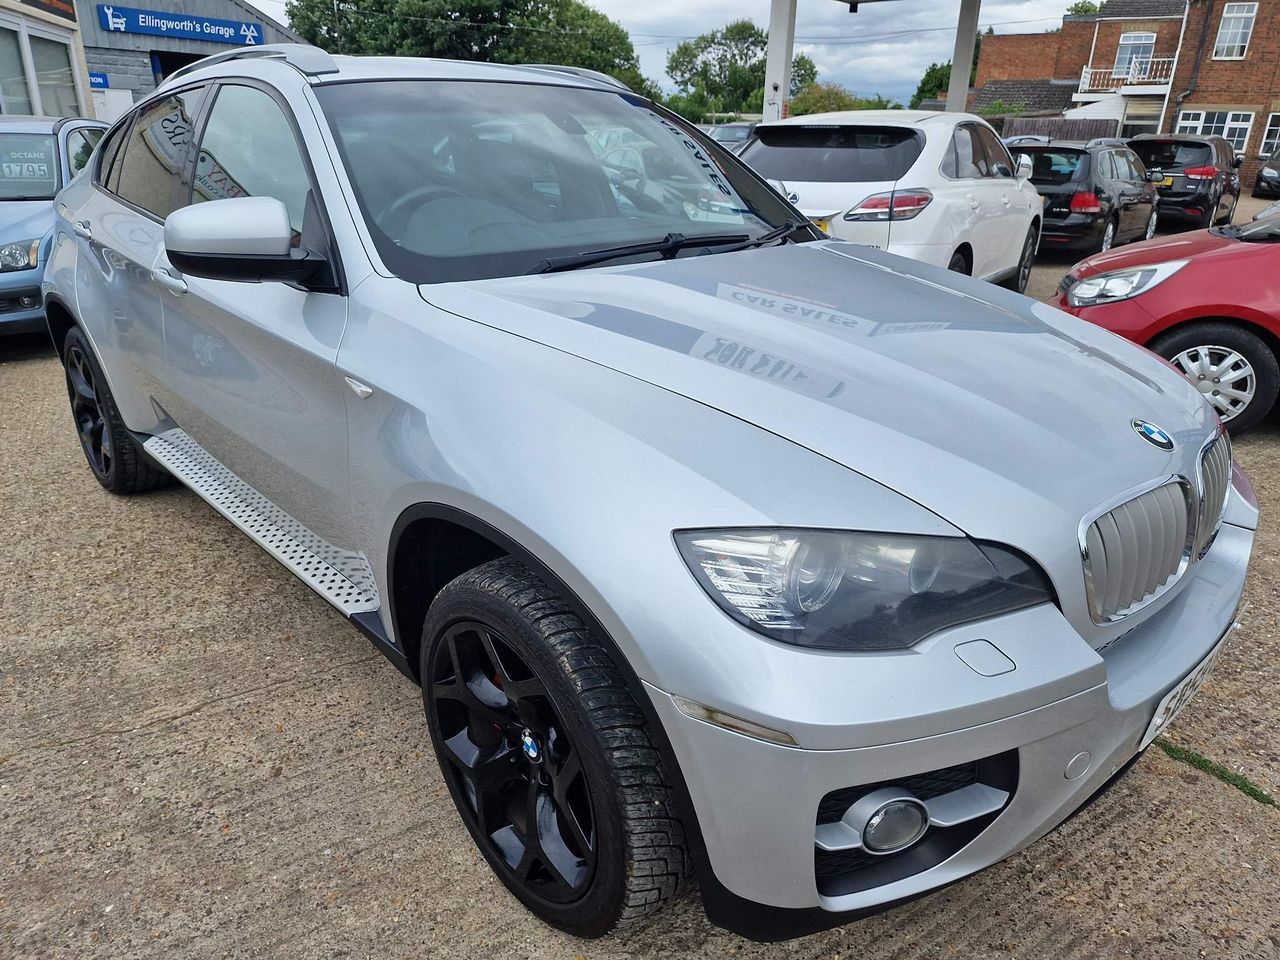 2009 BMW X6 3.0 35d xDrive 5dr - Picture 1 of 37